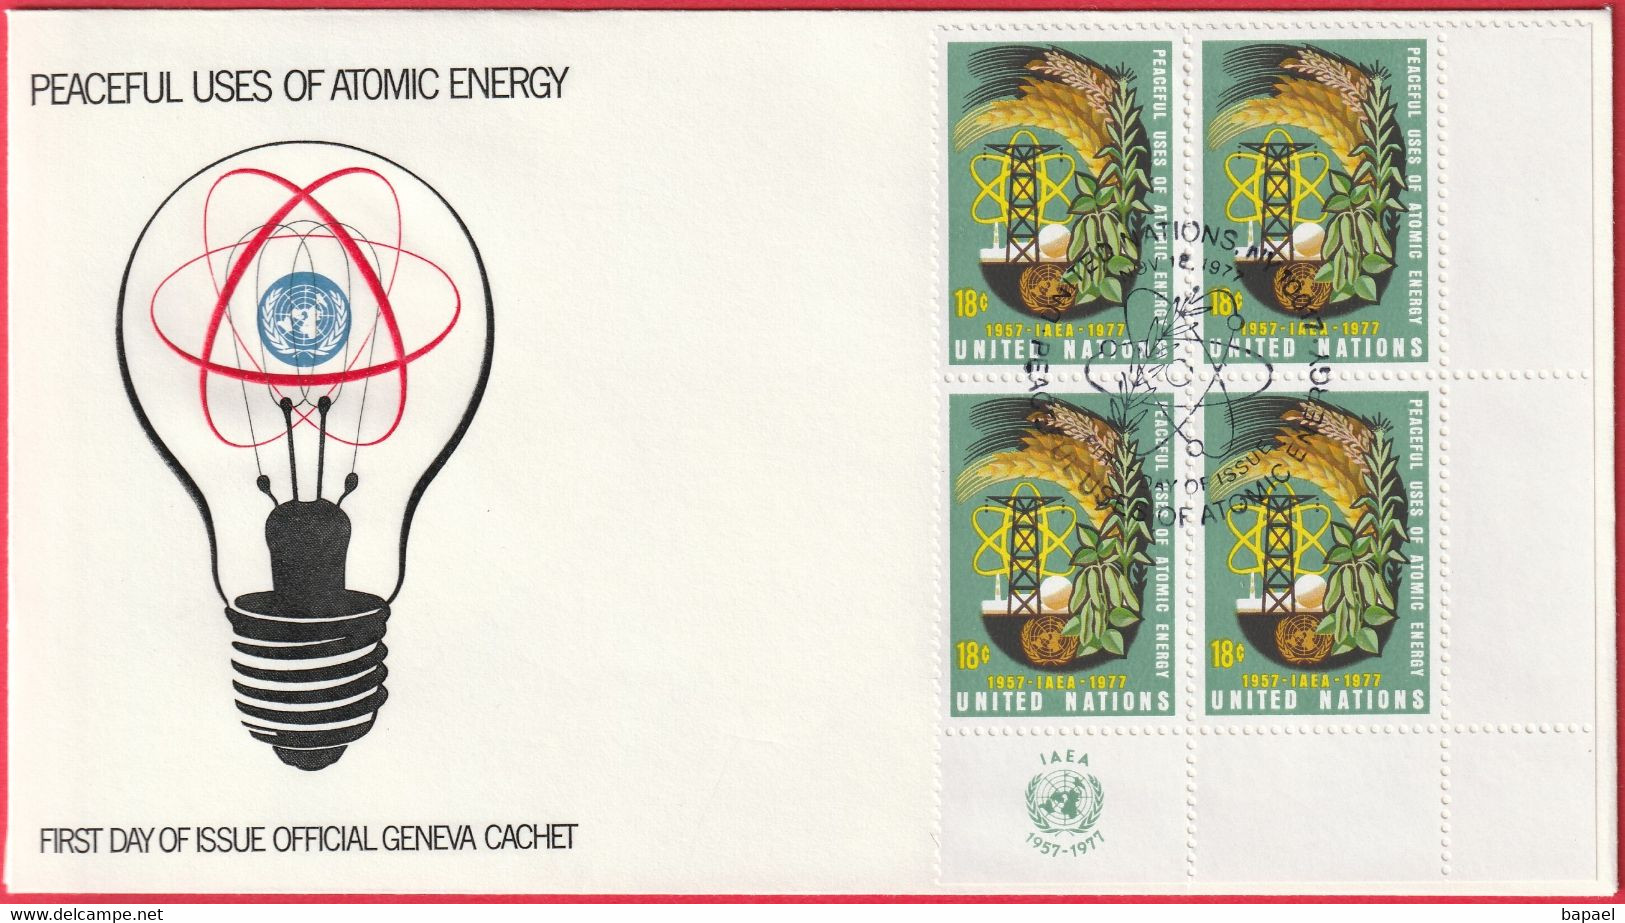 FDC - Enveloppe - Nations Unies - (New-York) (18-11-77) - Peaceful Uses Of Atomic Energy (2) (Recto-Verso) - Covers & Documents